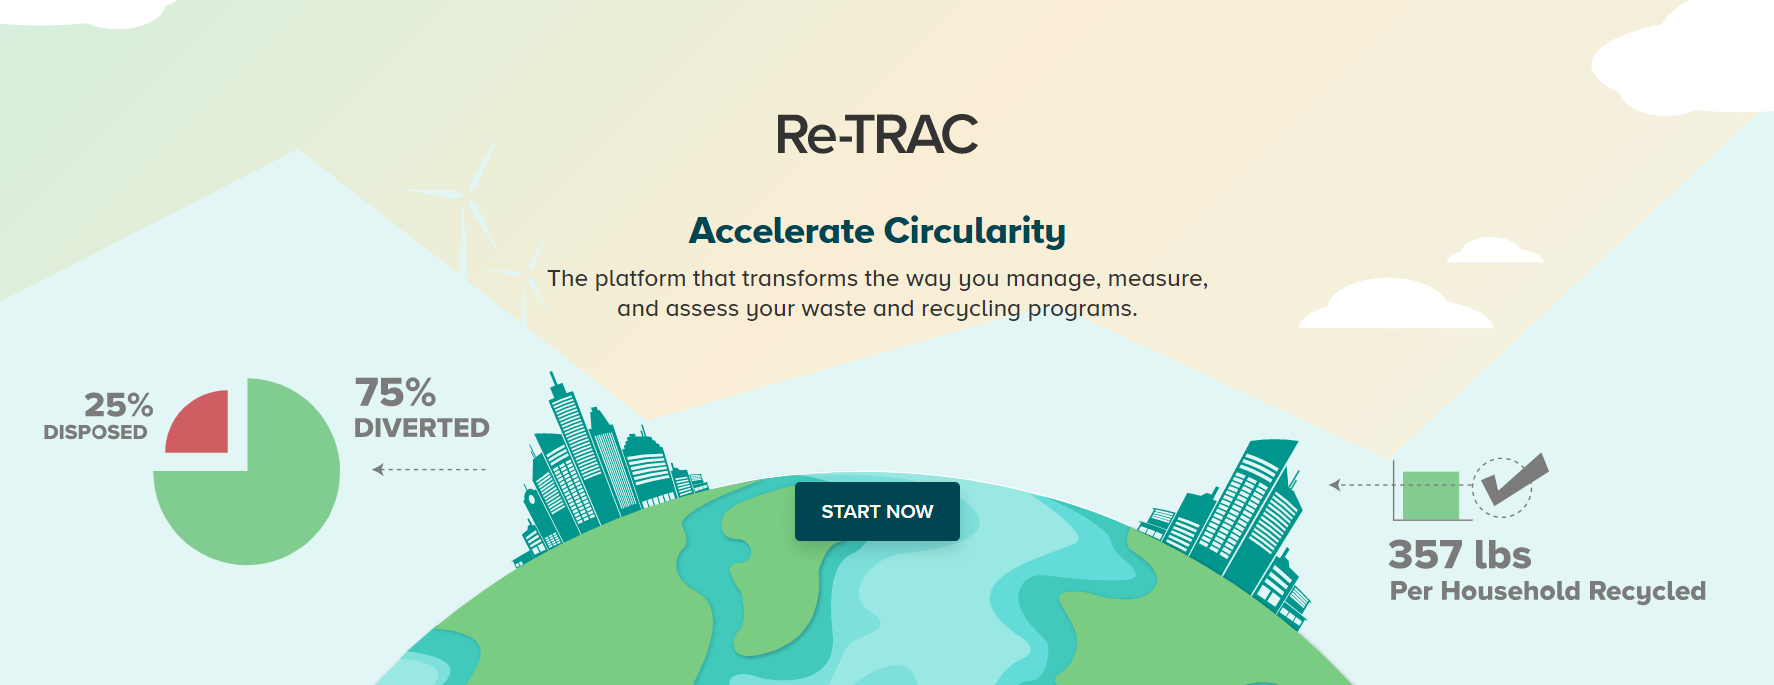 Welcome to the new era of Re-TRAC™